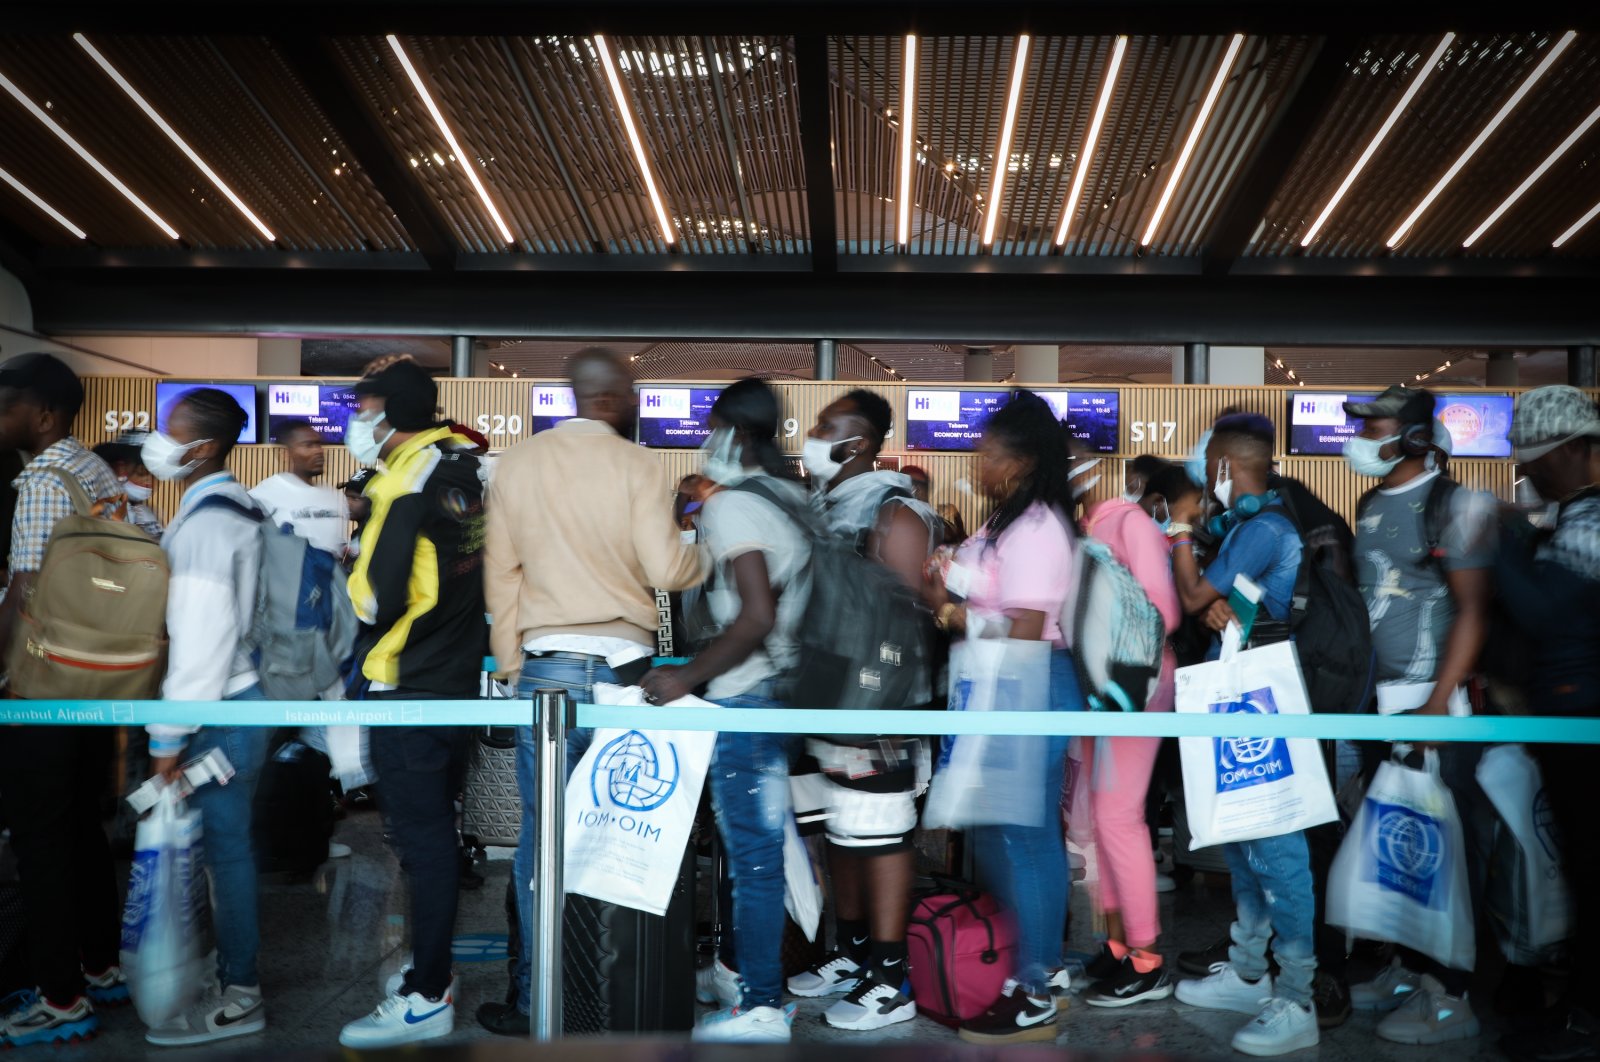 A group of Haitians are seen in a queue during the operation of the International Organization for Migration (IMO) at the Istanbul Airport, Turkey. (Courtesy of Emrah Özesen / the International Organization for Migration)